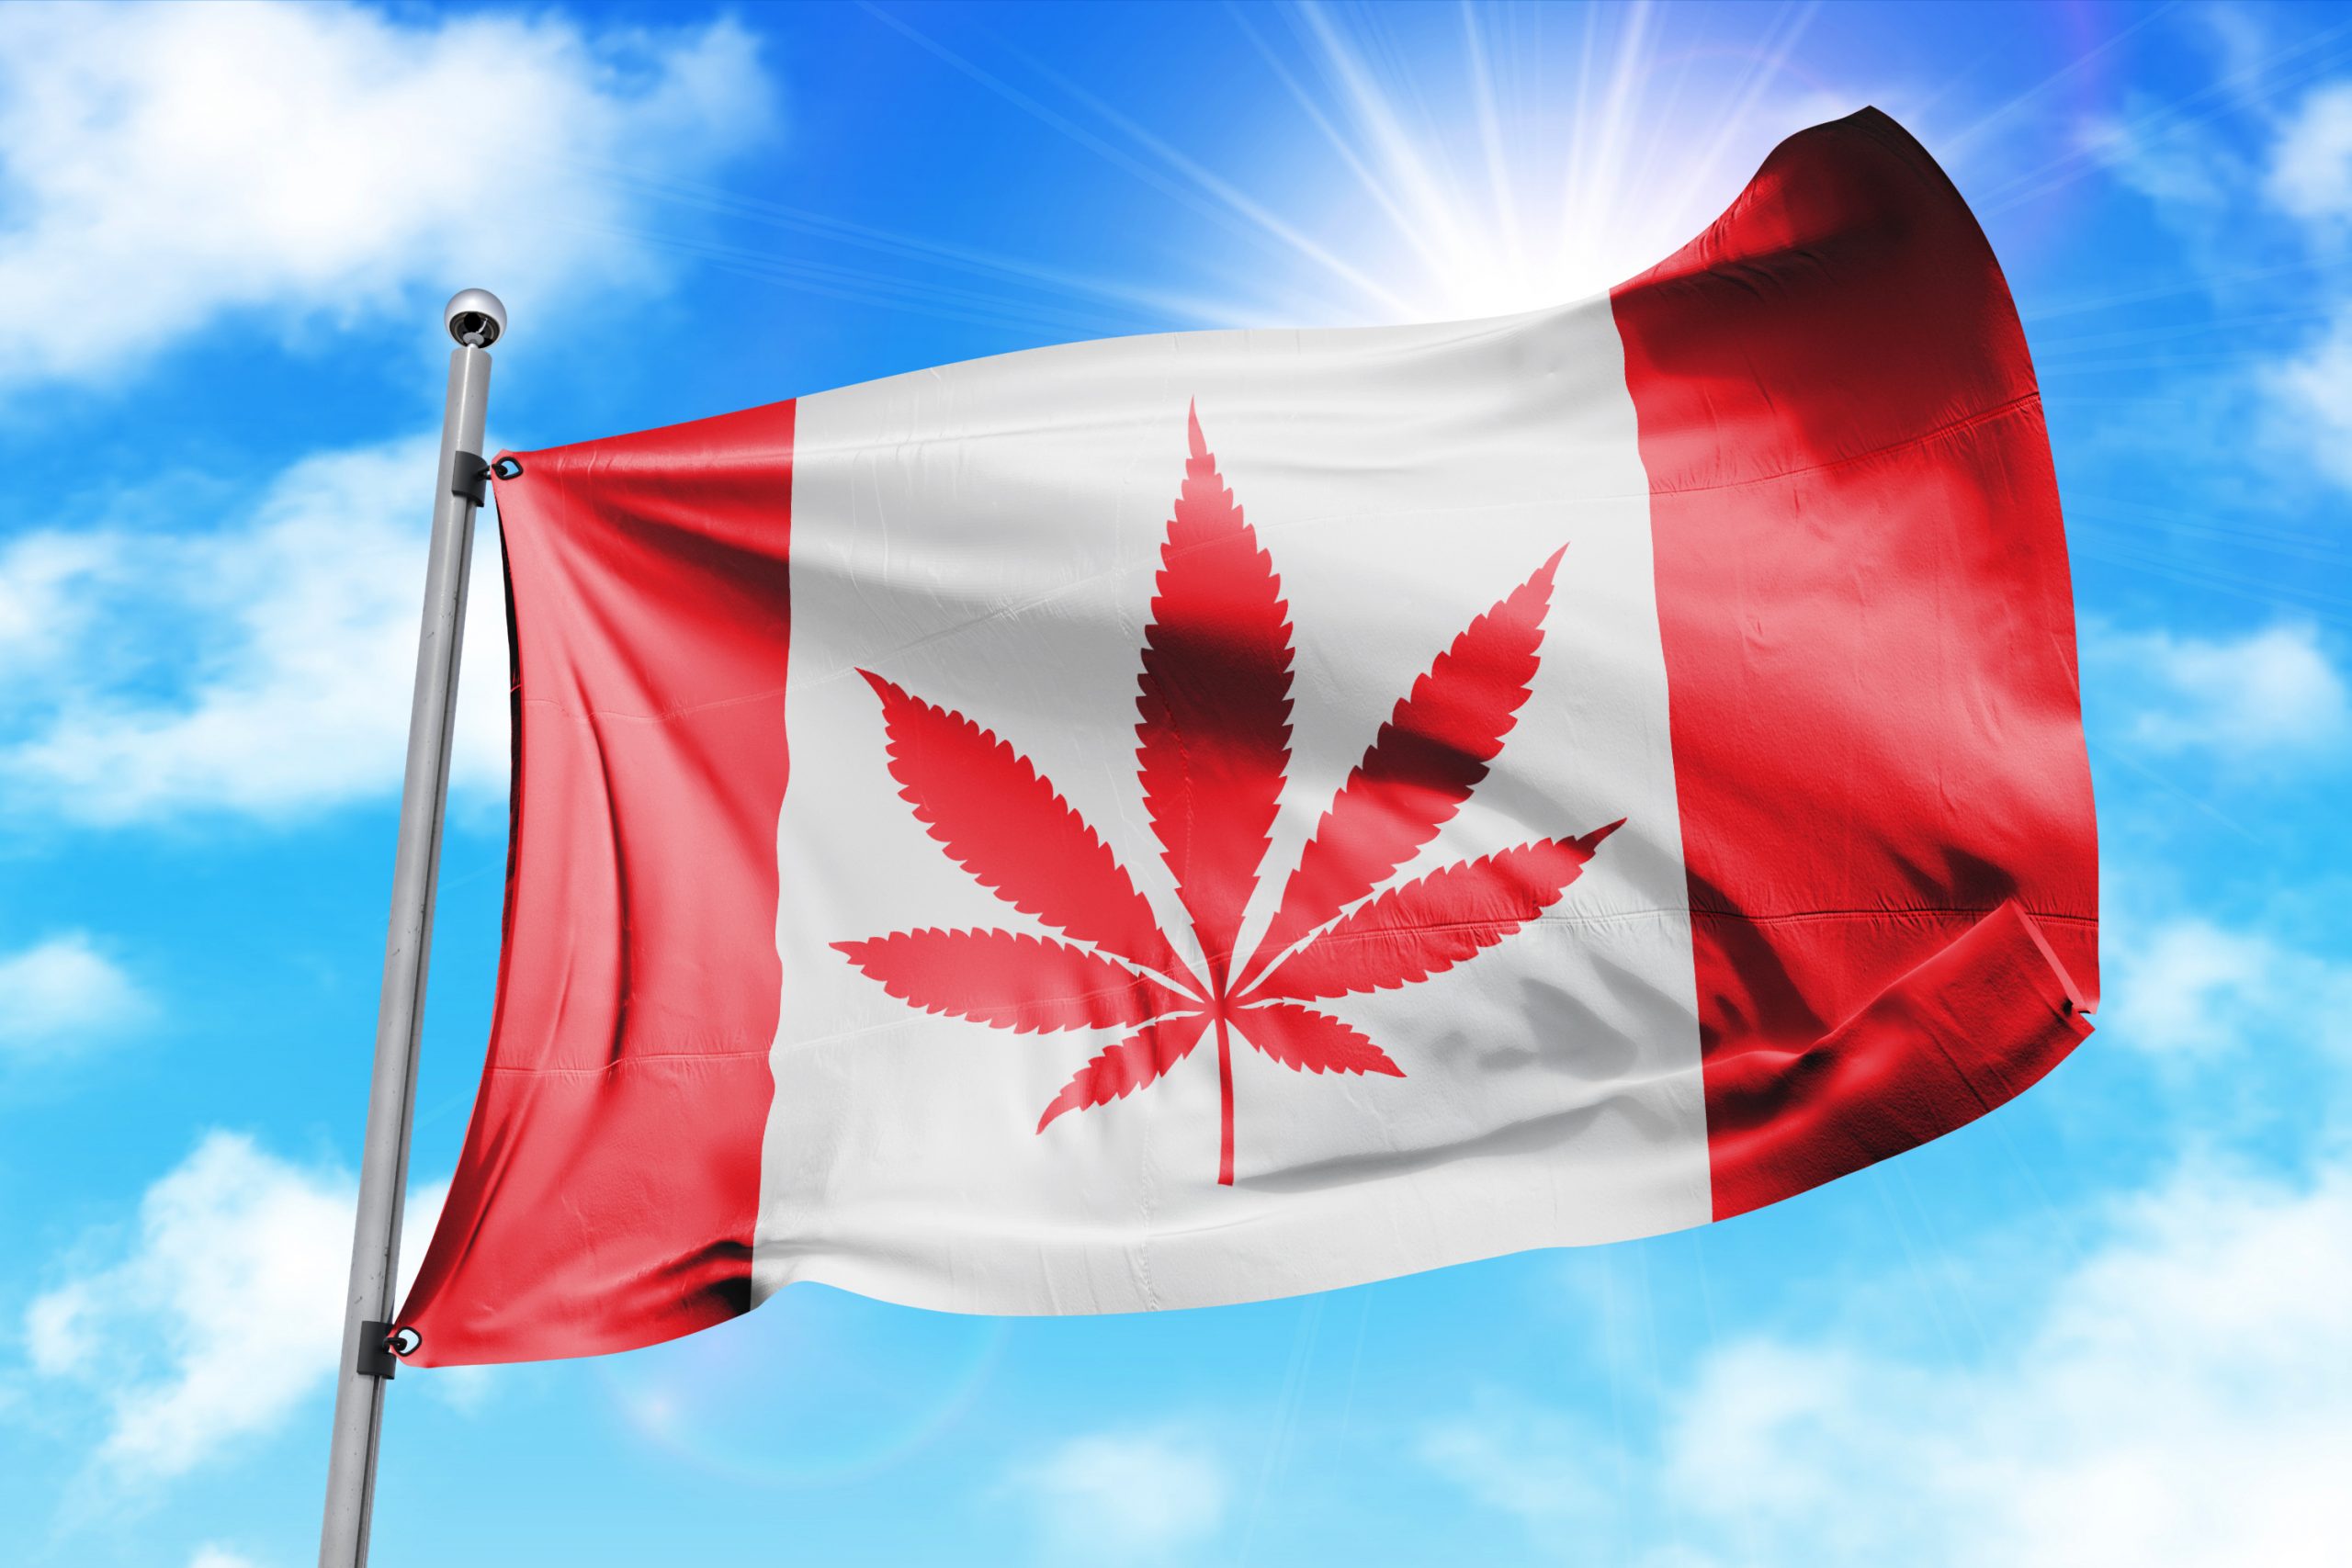 Canada Destroyed Over 3 Million Pounds of Cannabis Since 2018